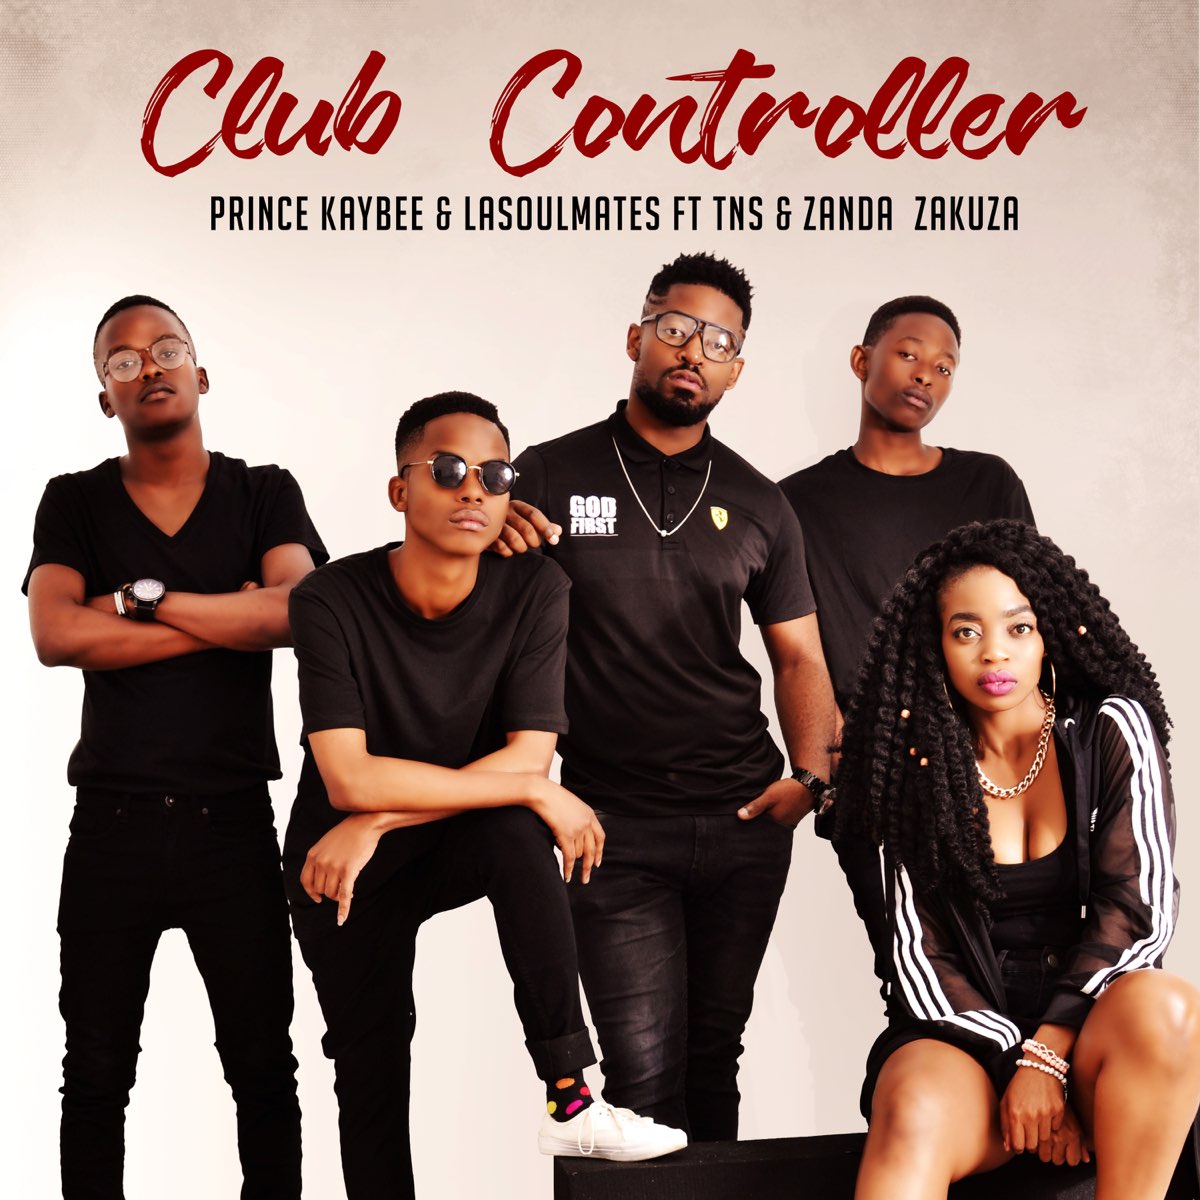 TNS Calls Out Prince Kaybee And Zanda Zakuza For Failing To Pay Other Producers Who Worked On Hitsong "Club Controller" 3 Years Ago-iHarare